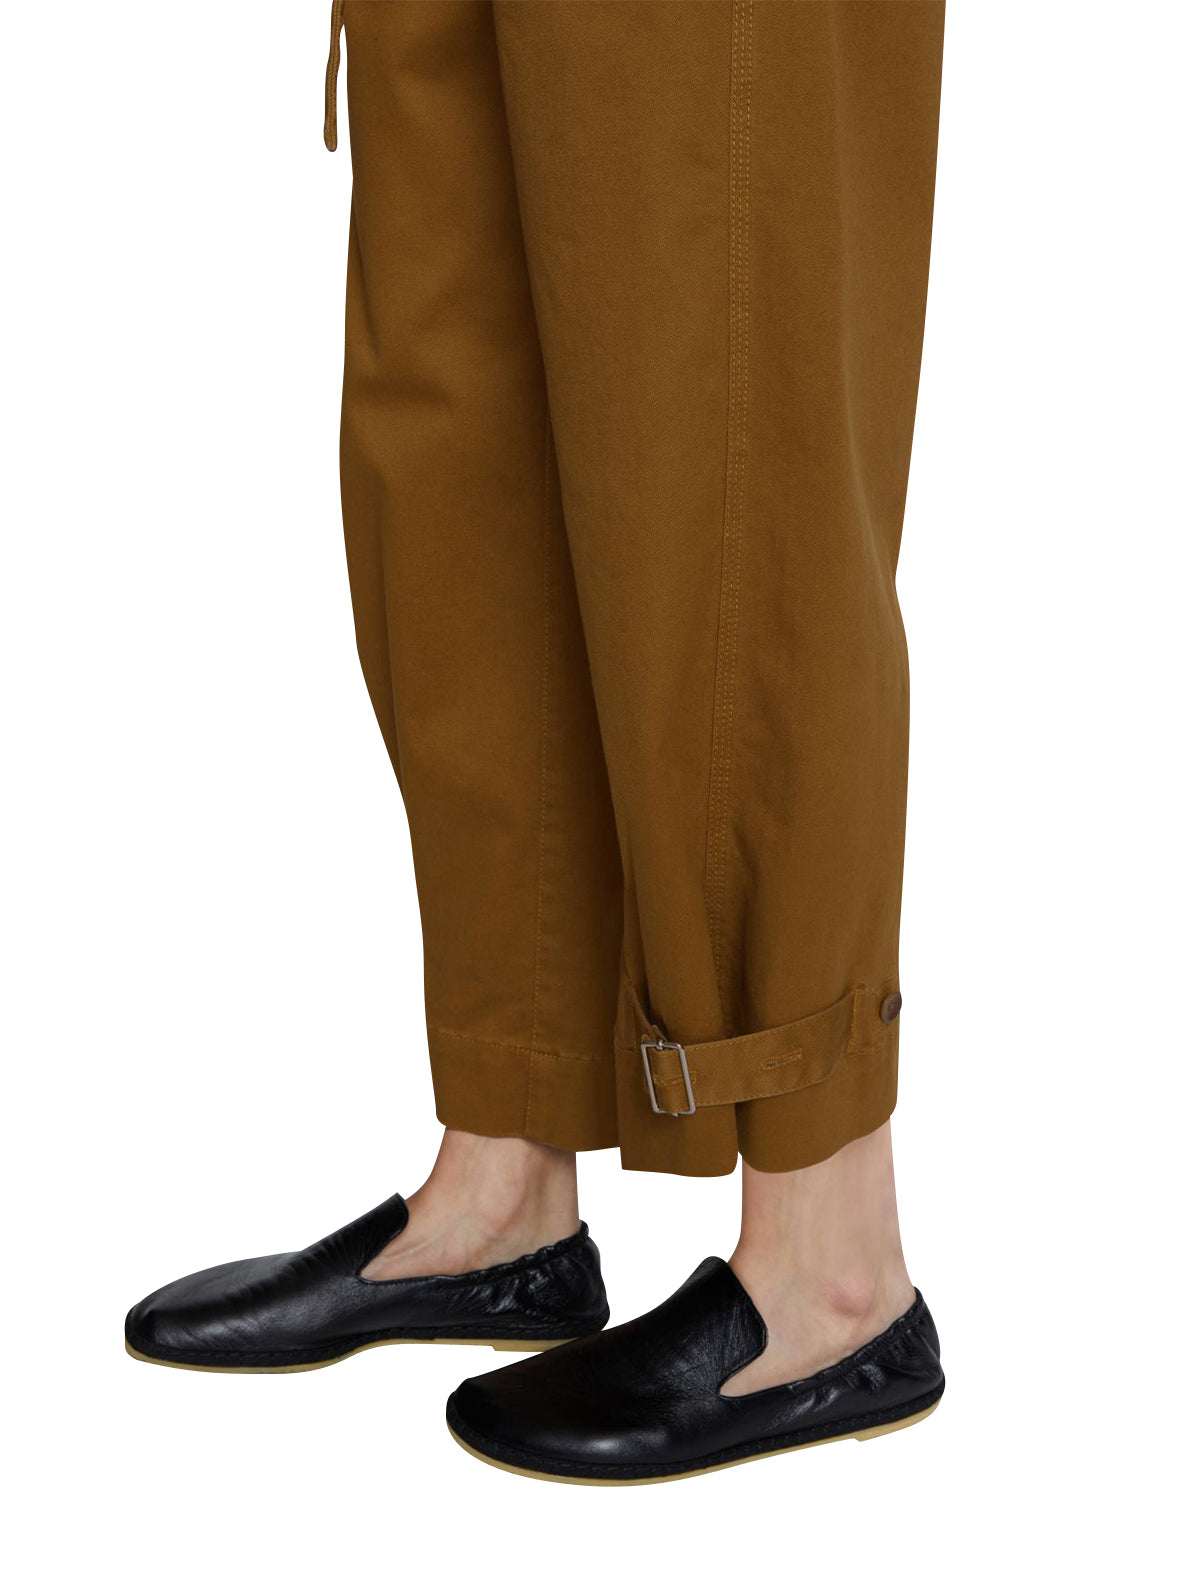 PROENZA SCHOULER WHITE LABEL Cotton Twill Tapered Pants Olive